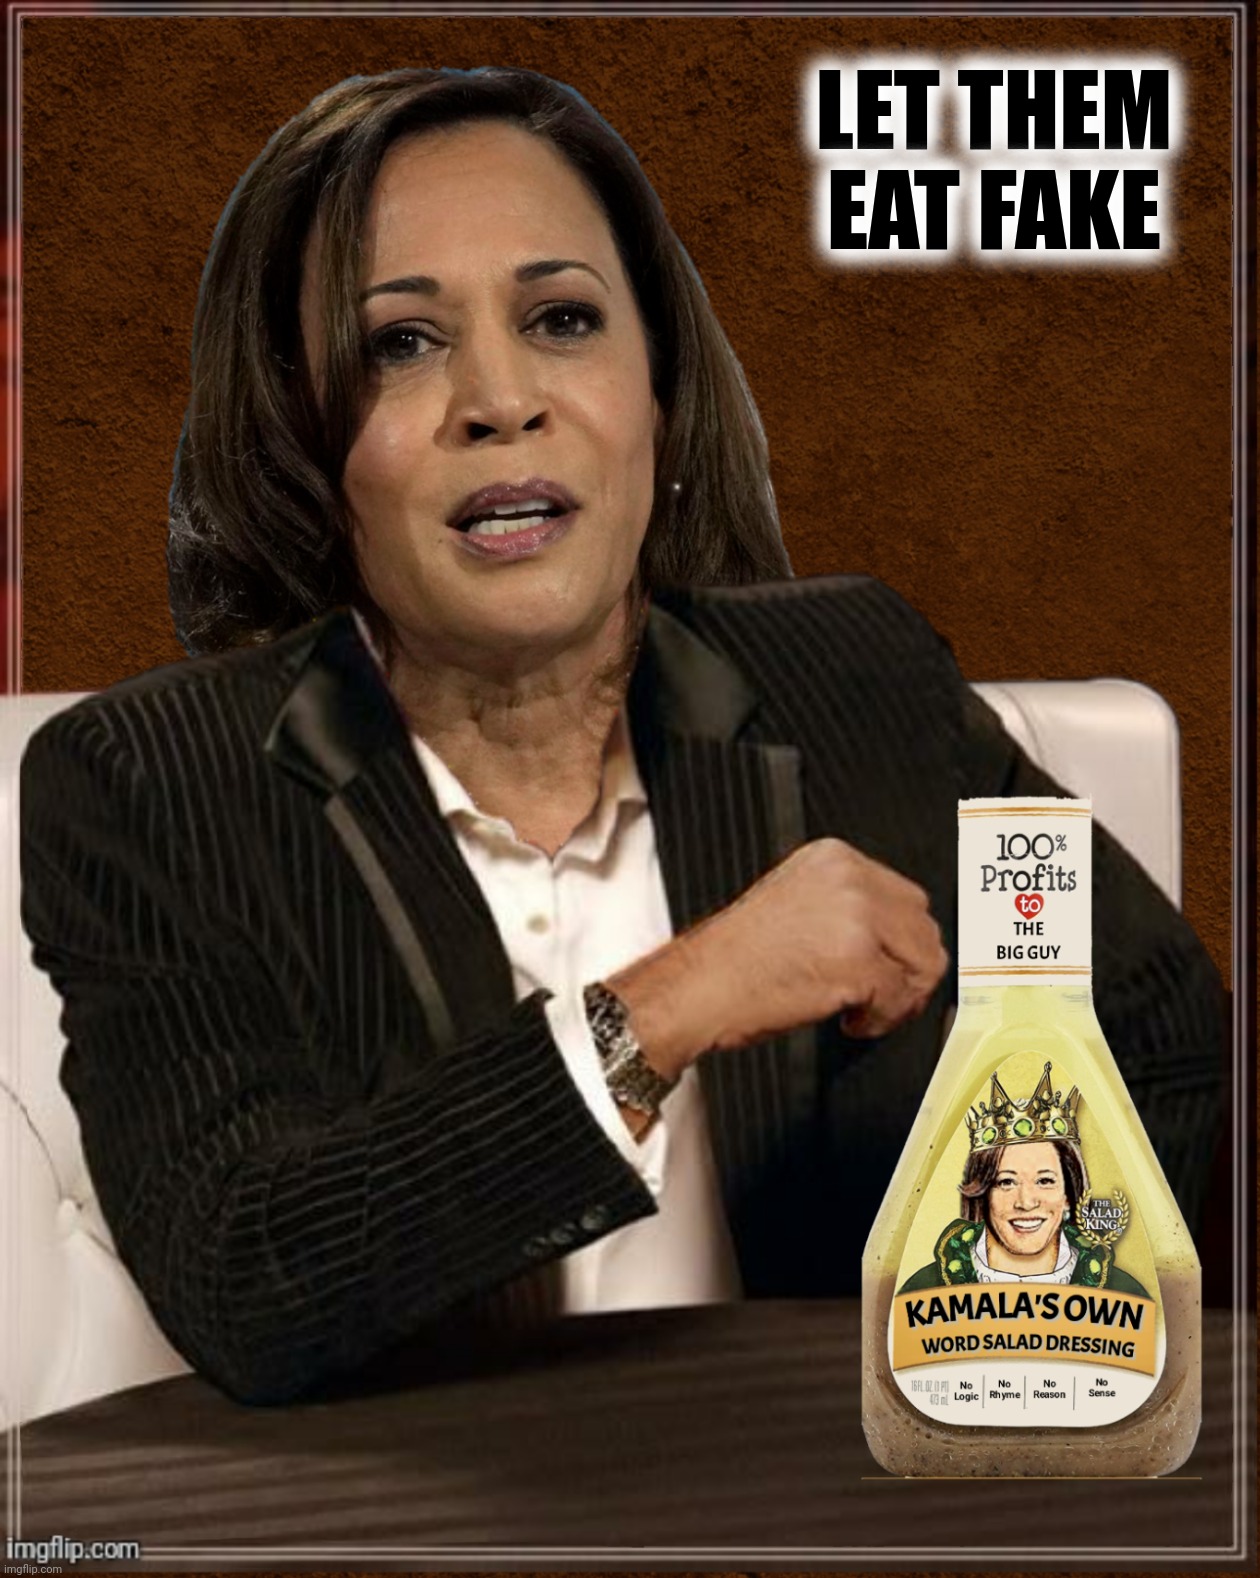 Bad Photoshop Sunday presents:  Let's them eat fake she says, just like Marie Antoinette | LET THEM EAT FAKE | image tagged in bad photoshop sunday,kamala harris,the most interesting man in the world,kamala's own | made w/ Imgflip meme maker